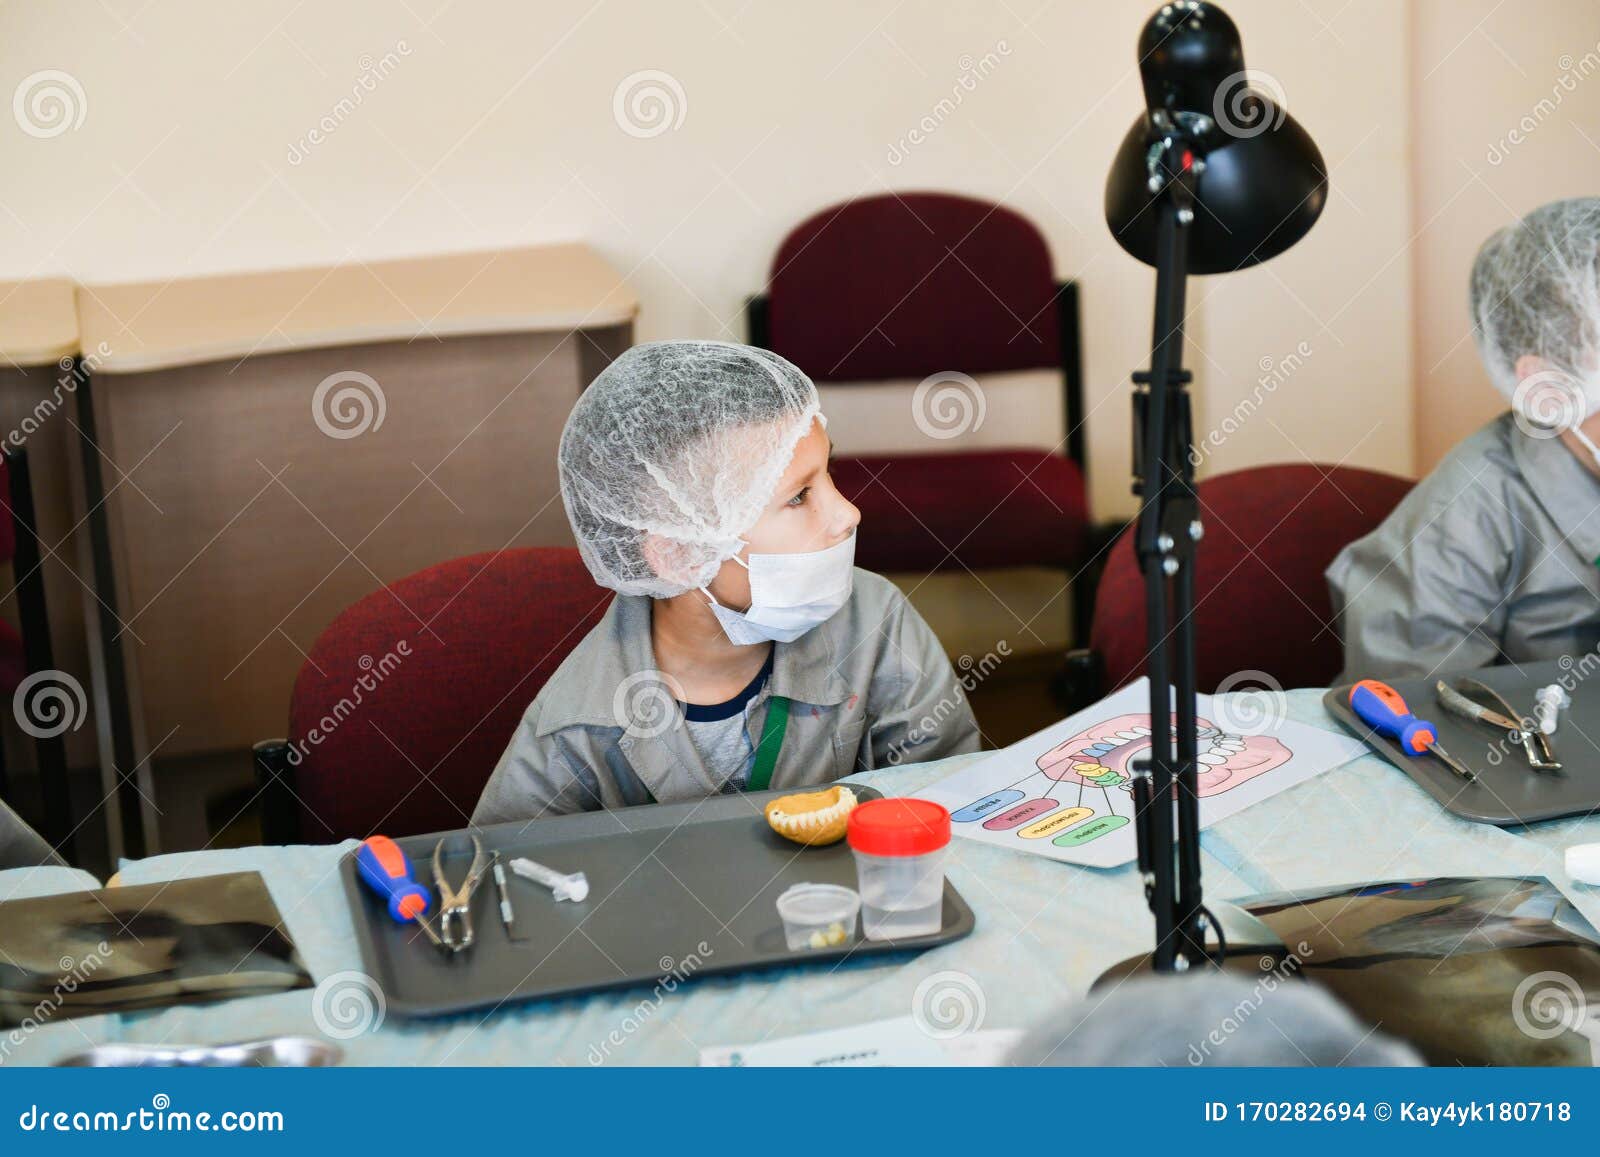 Children At The Lecture At The Dentist Training Class In Dentistry